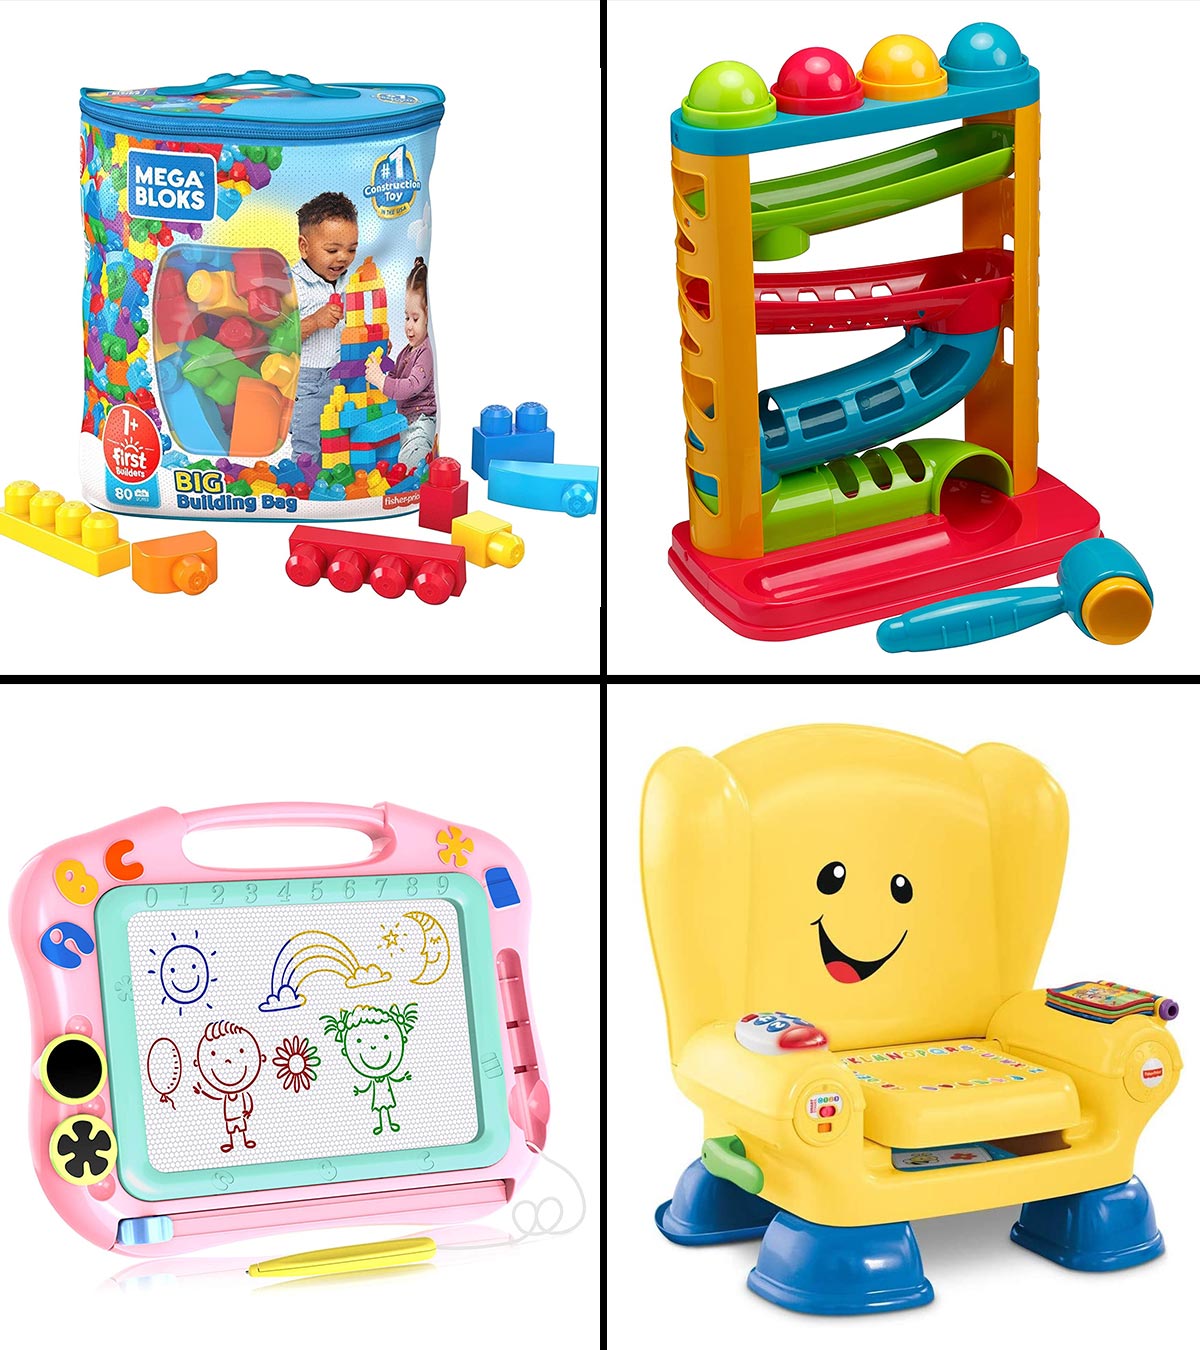 Best Montessori Toys For 1 Year Old - Our Favorite 12-24 Month Activities